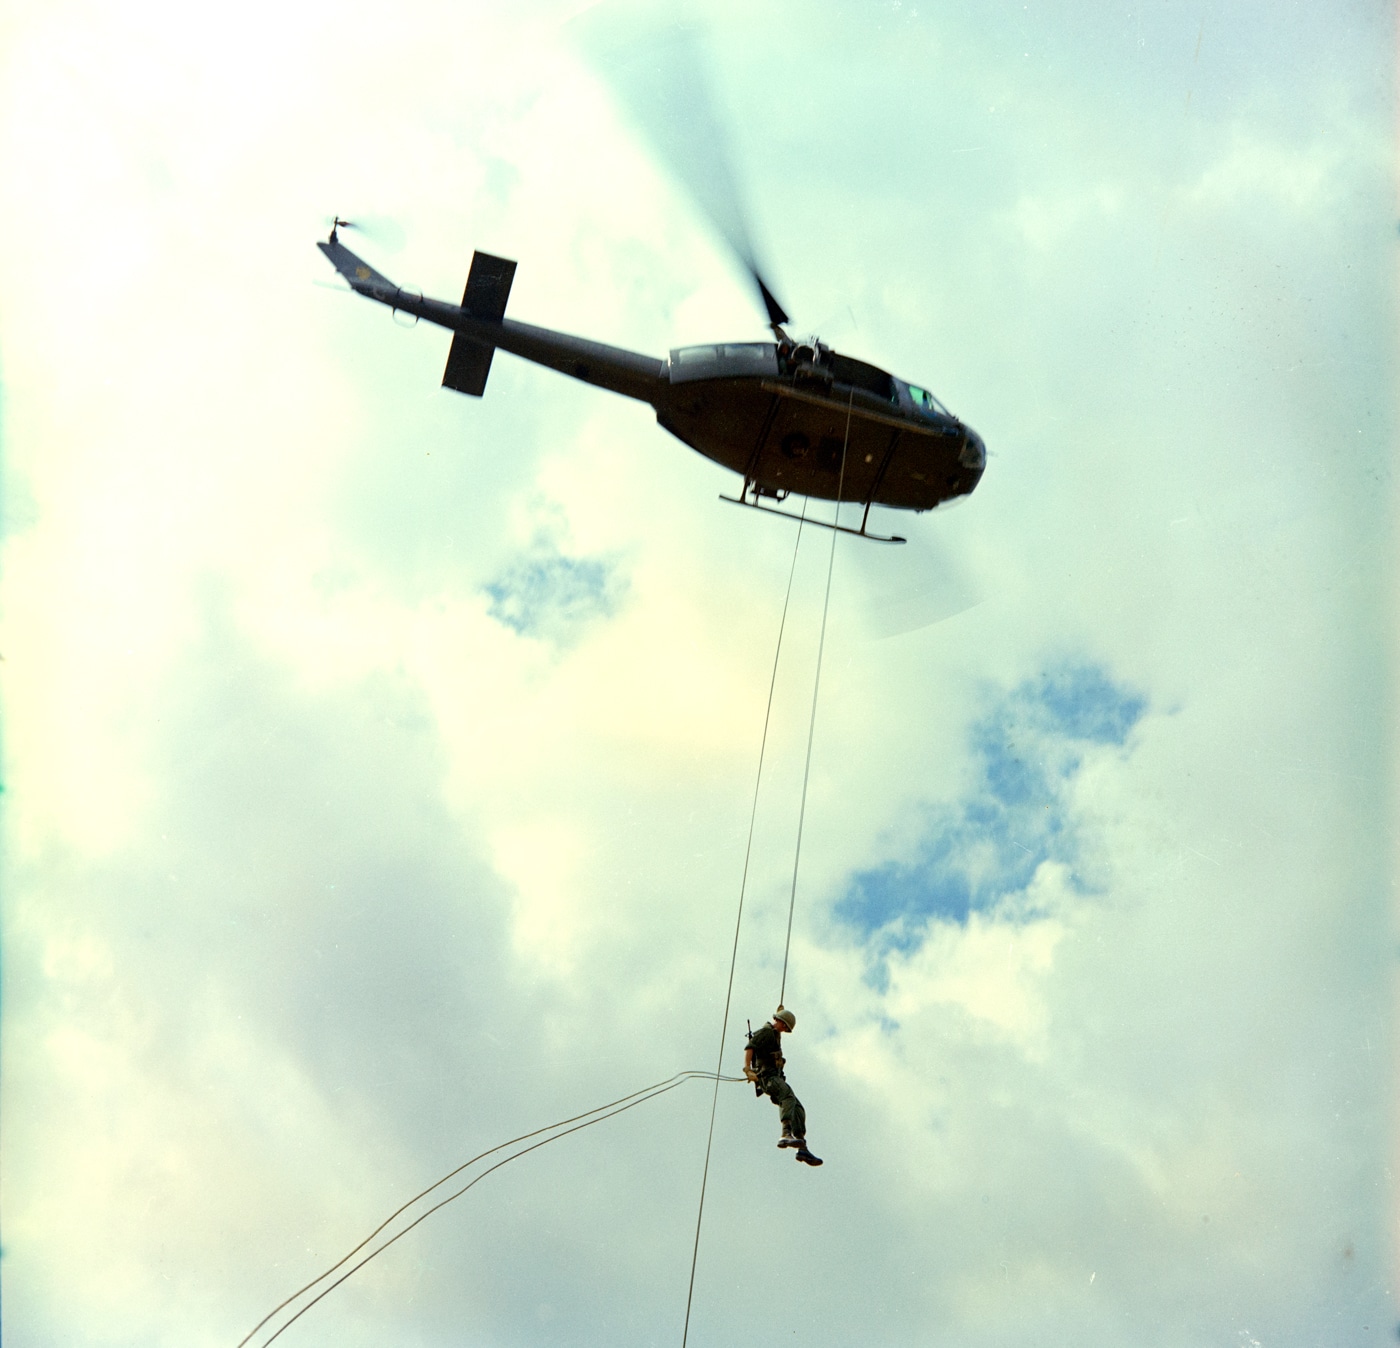 In this photo, we see a U.S. Army soldier repelling from a UH-1D helicopter during the Vietnam War. The Iroquois served many roles including command and control operations, insertion of troops, transport of supplies and medical evacuation. Hueys have served in these roles for decades ever since. 